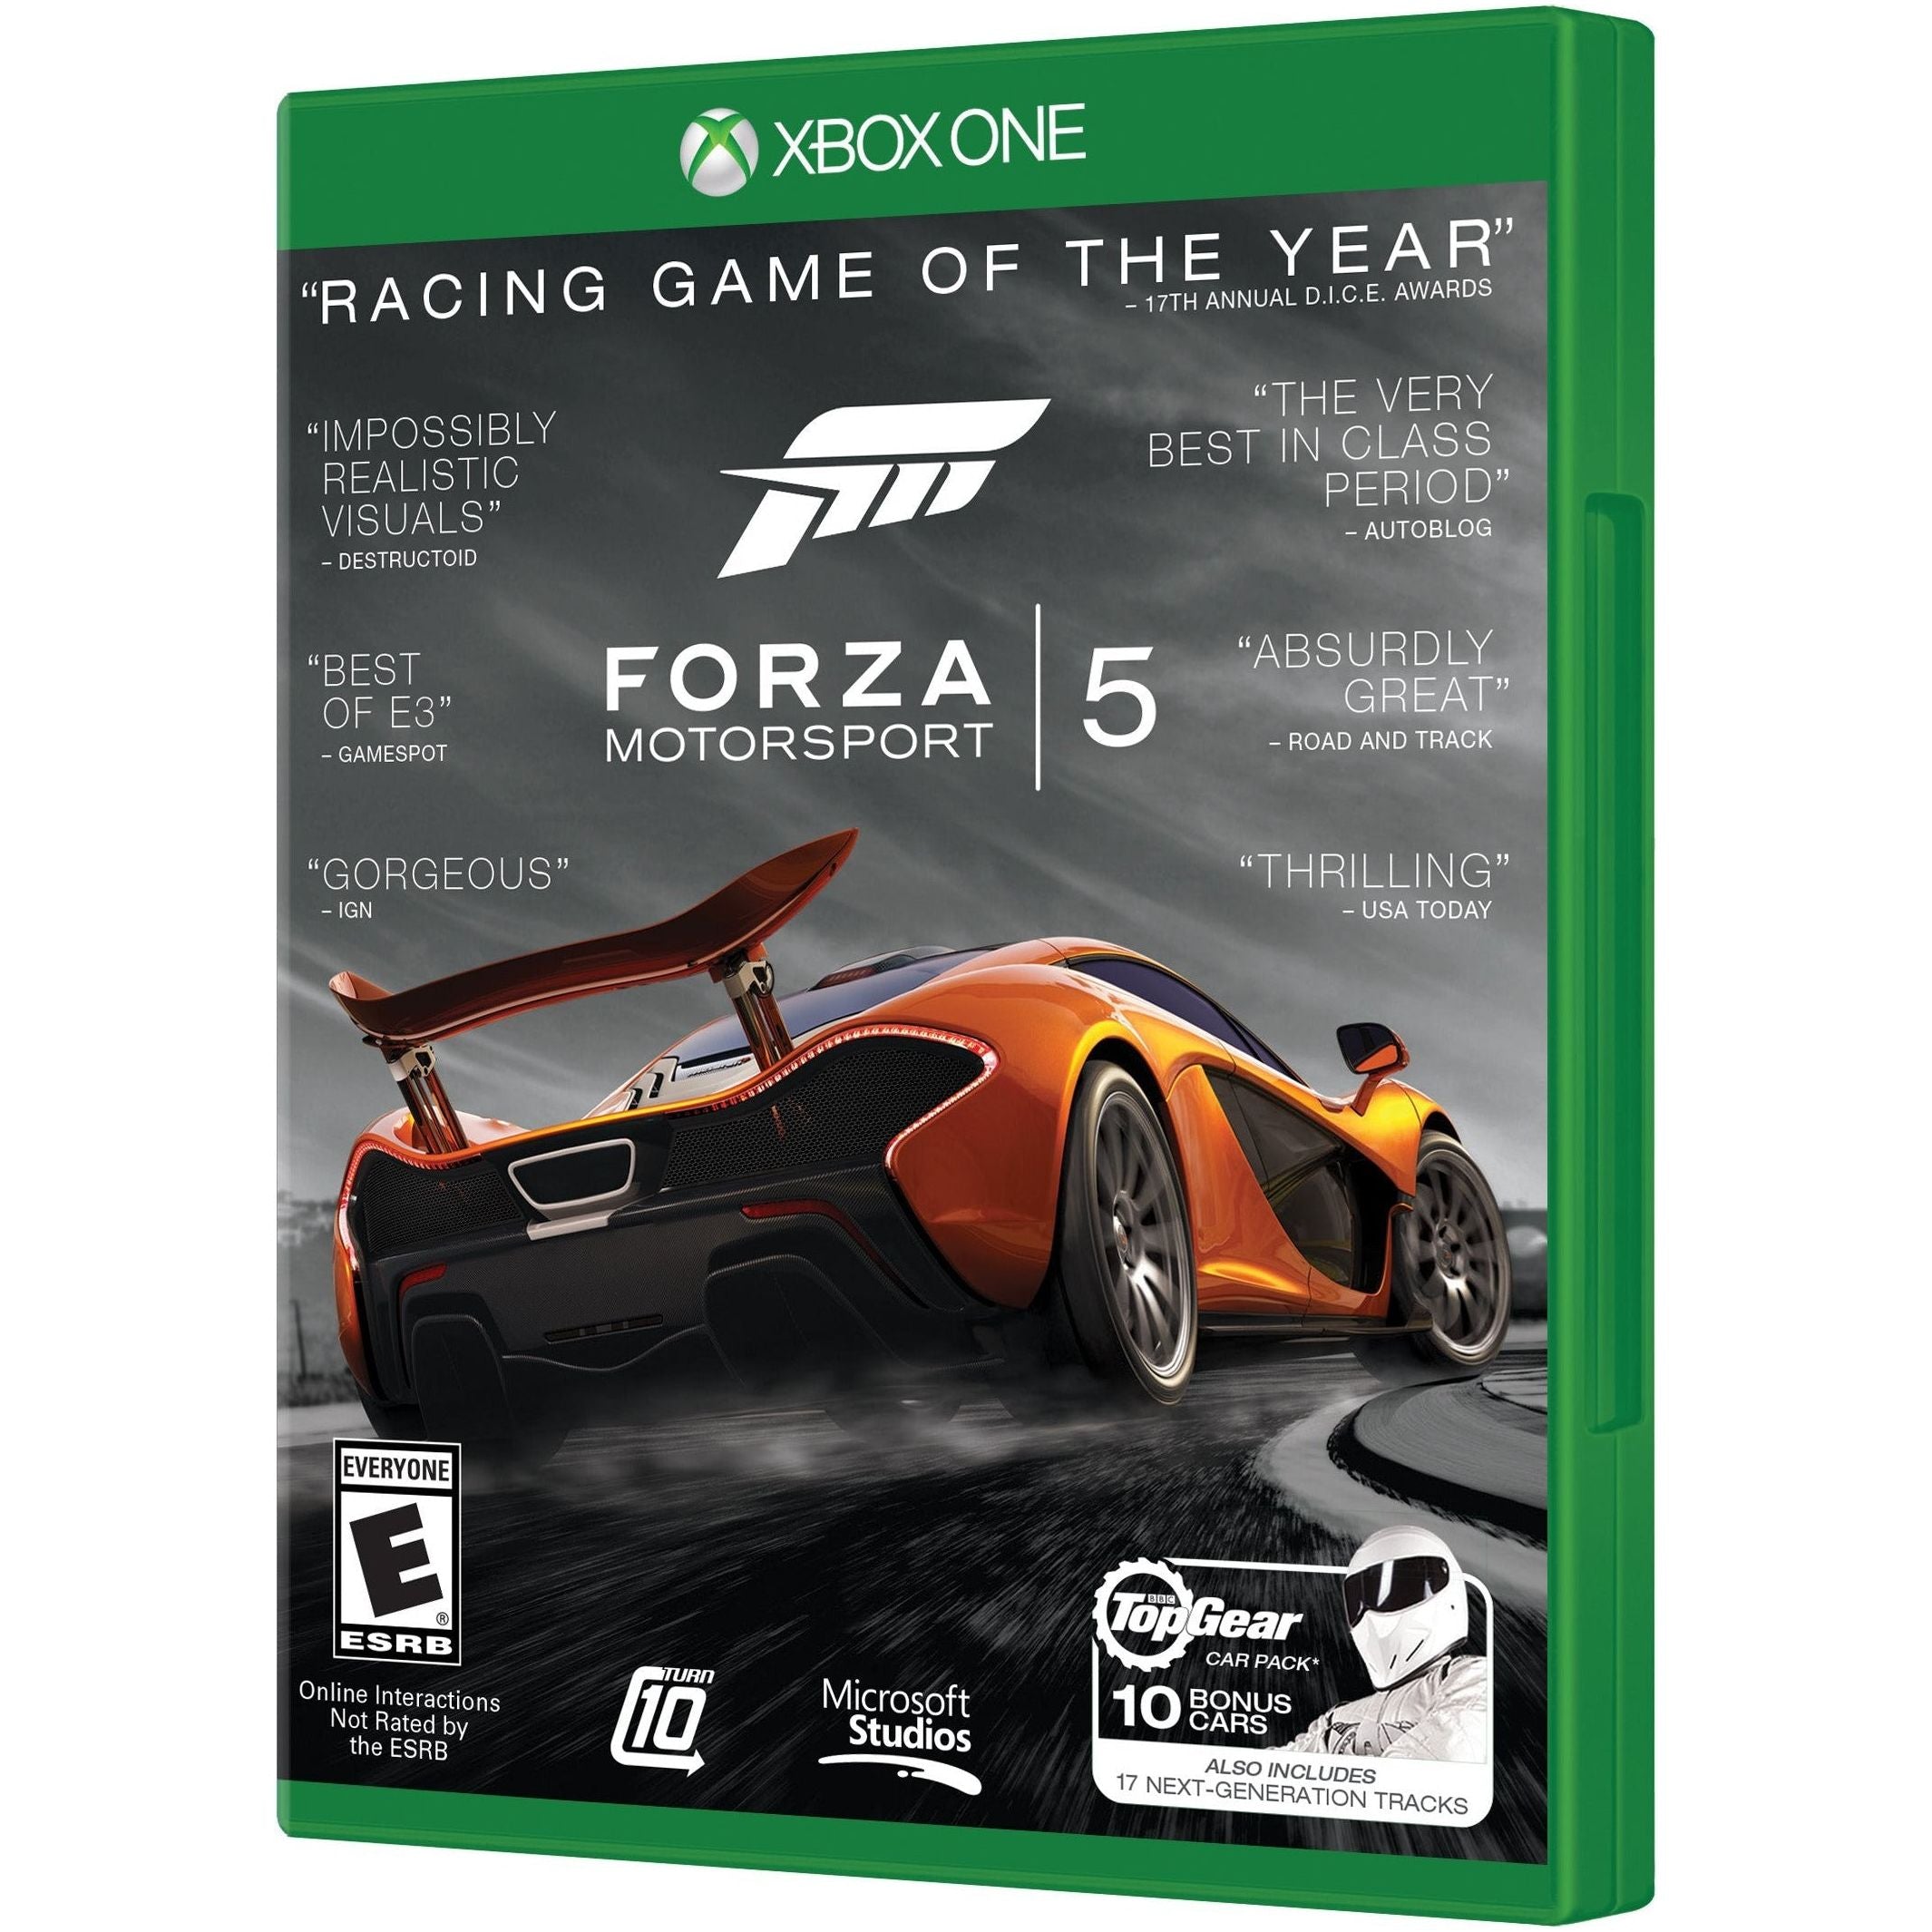 XBOX ONE - Forza Motorsport 5 Racing Game of the Year